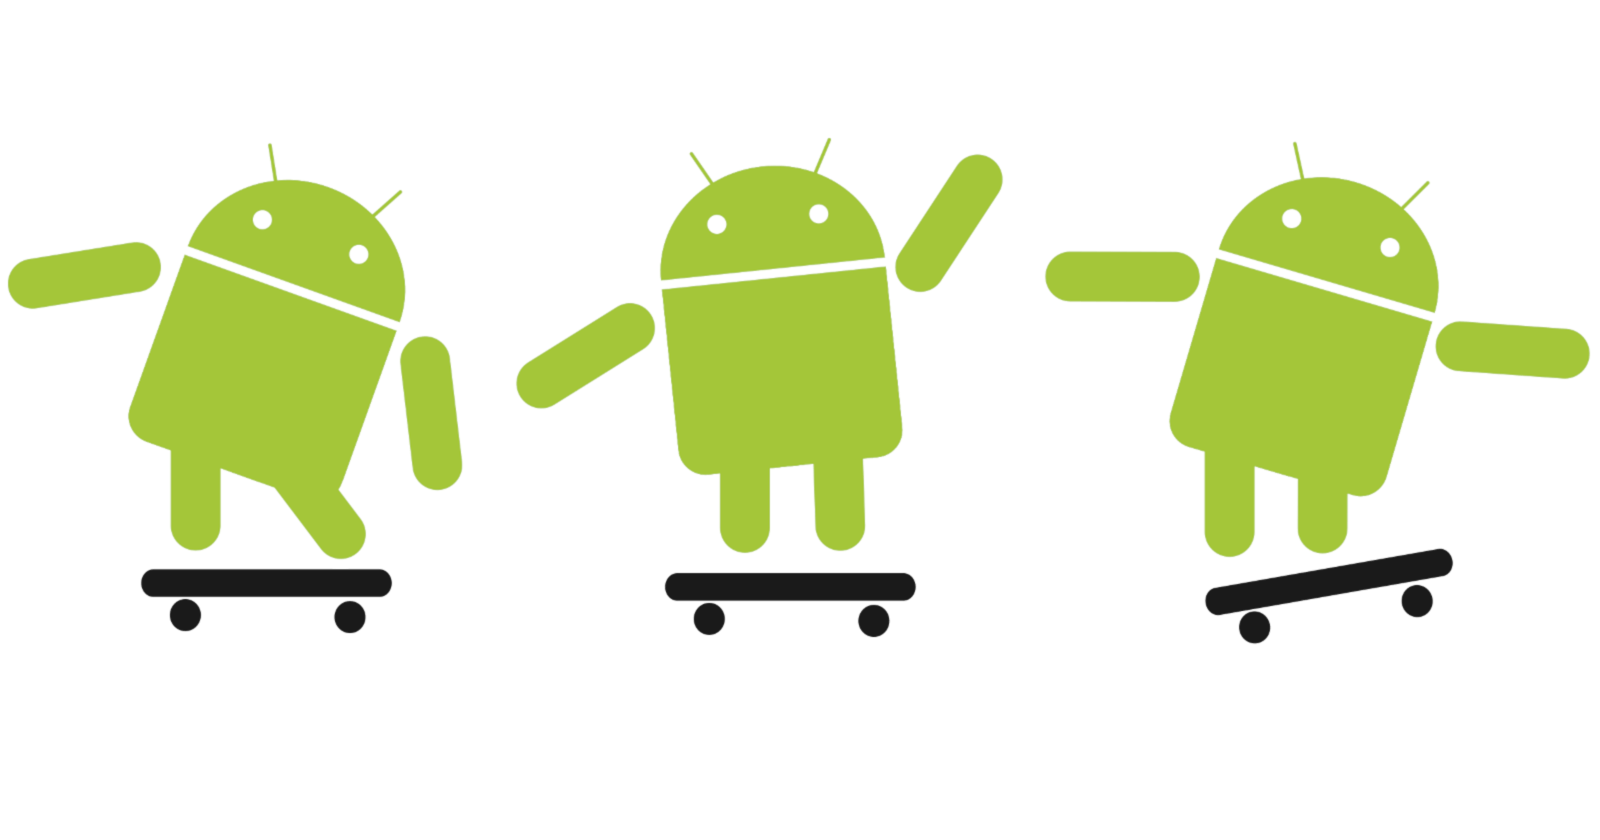 Building an artificial back stack with the Android Navigation component